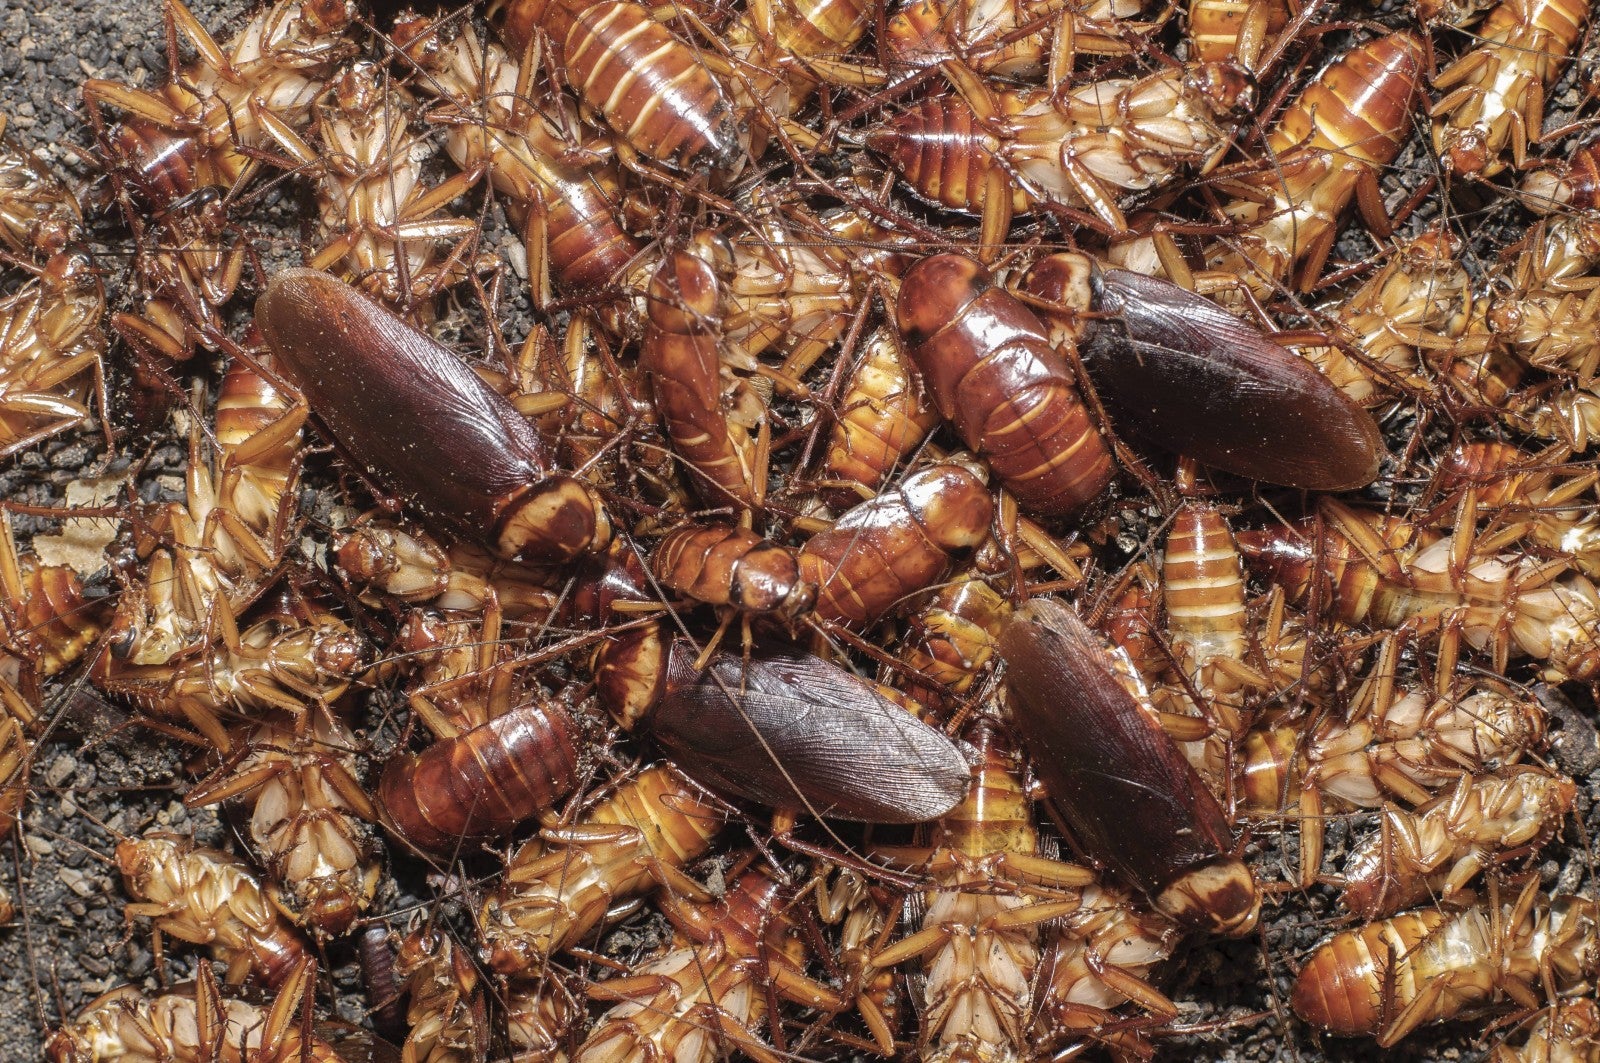 World's Largest Roach Farm Breeds 6 Billion Cockroaches a Year for 'Healing Potion' - WORLD OF BUZZ 5